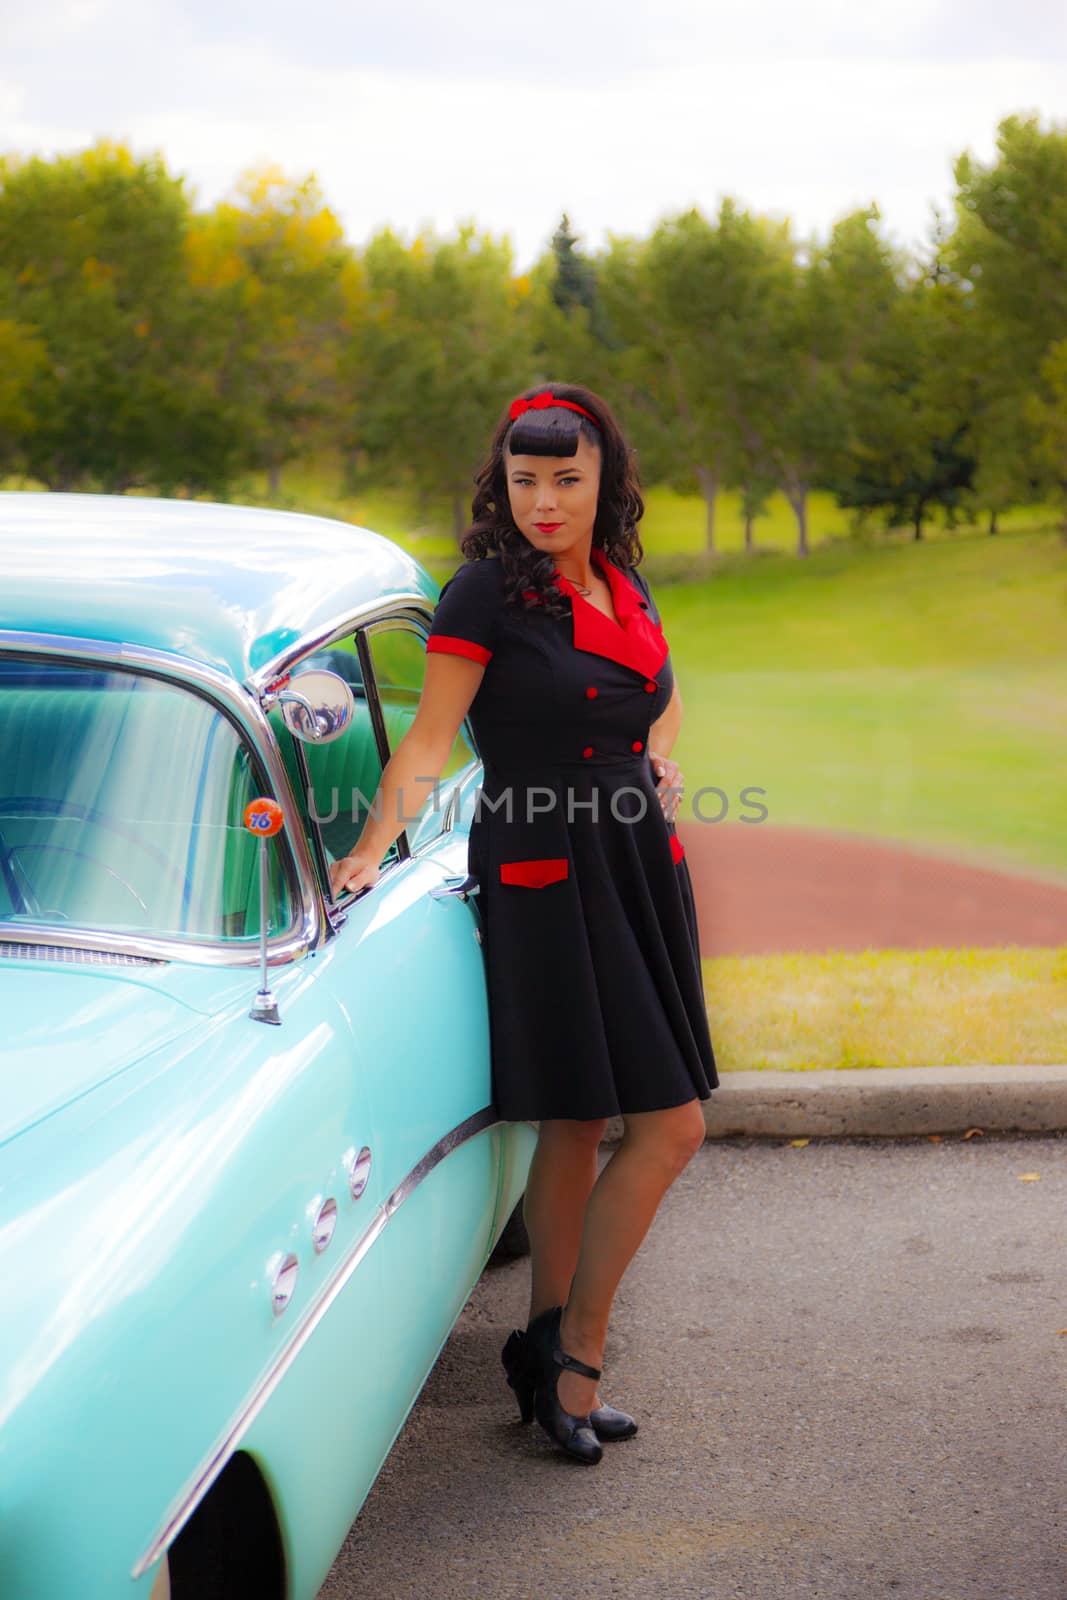 Pin Up Girls with Great Cars by Imagecom